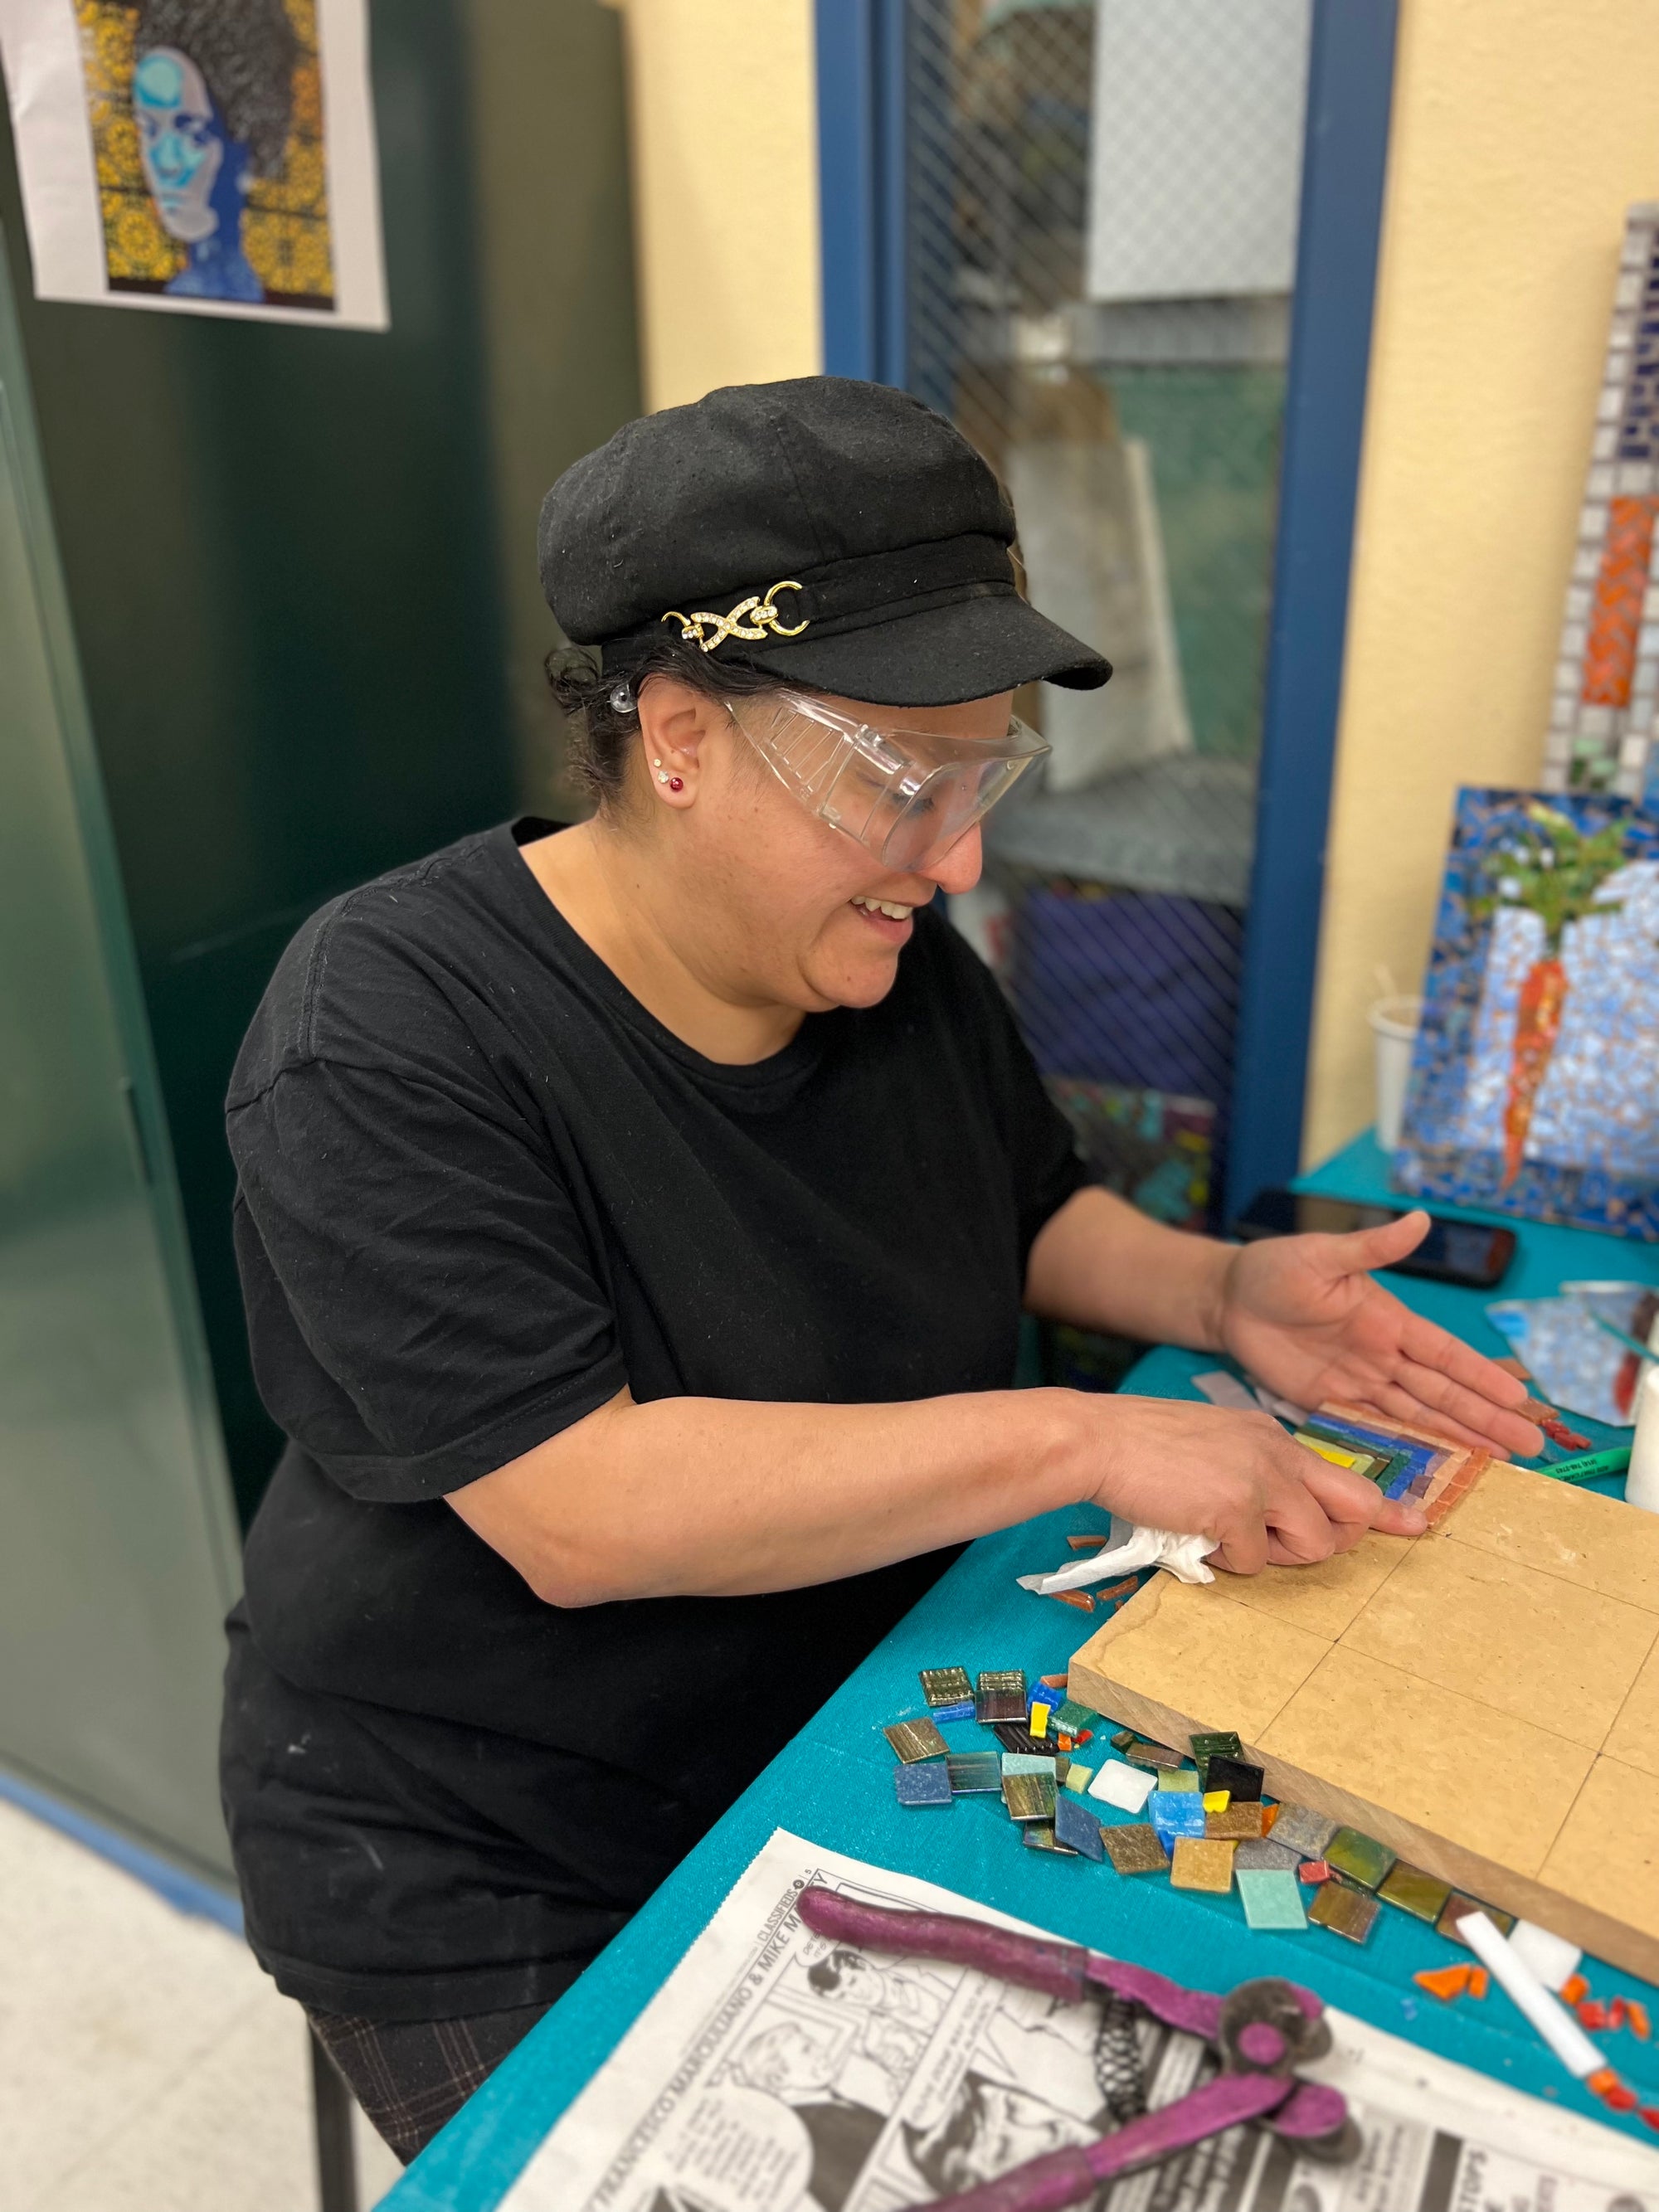 Artist working on mosaic at a Piece by Piece workshop.